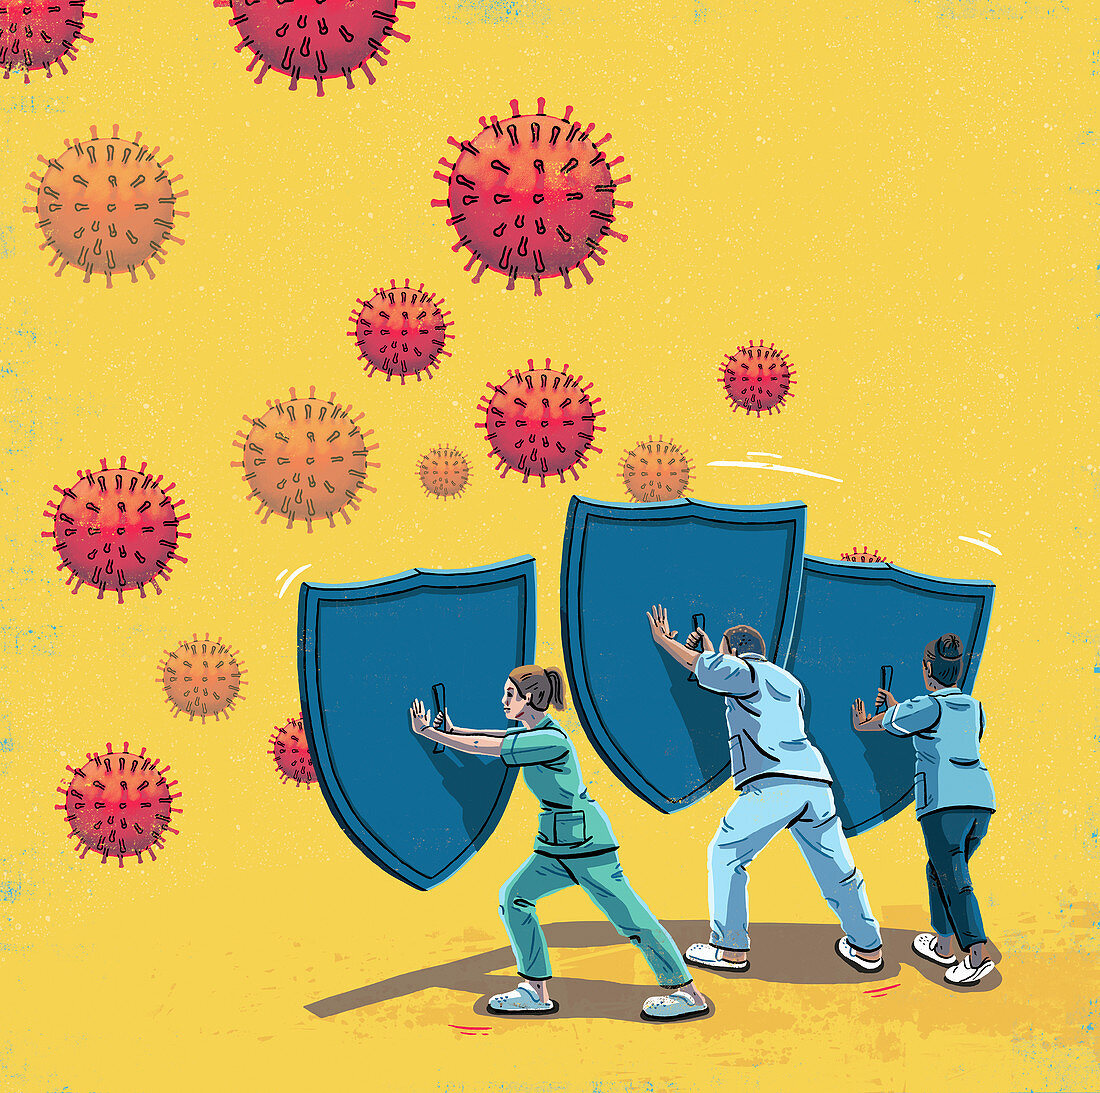 Healthcare workers with shields, illustration